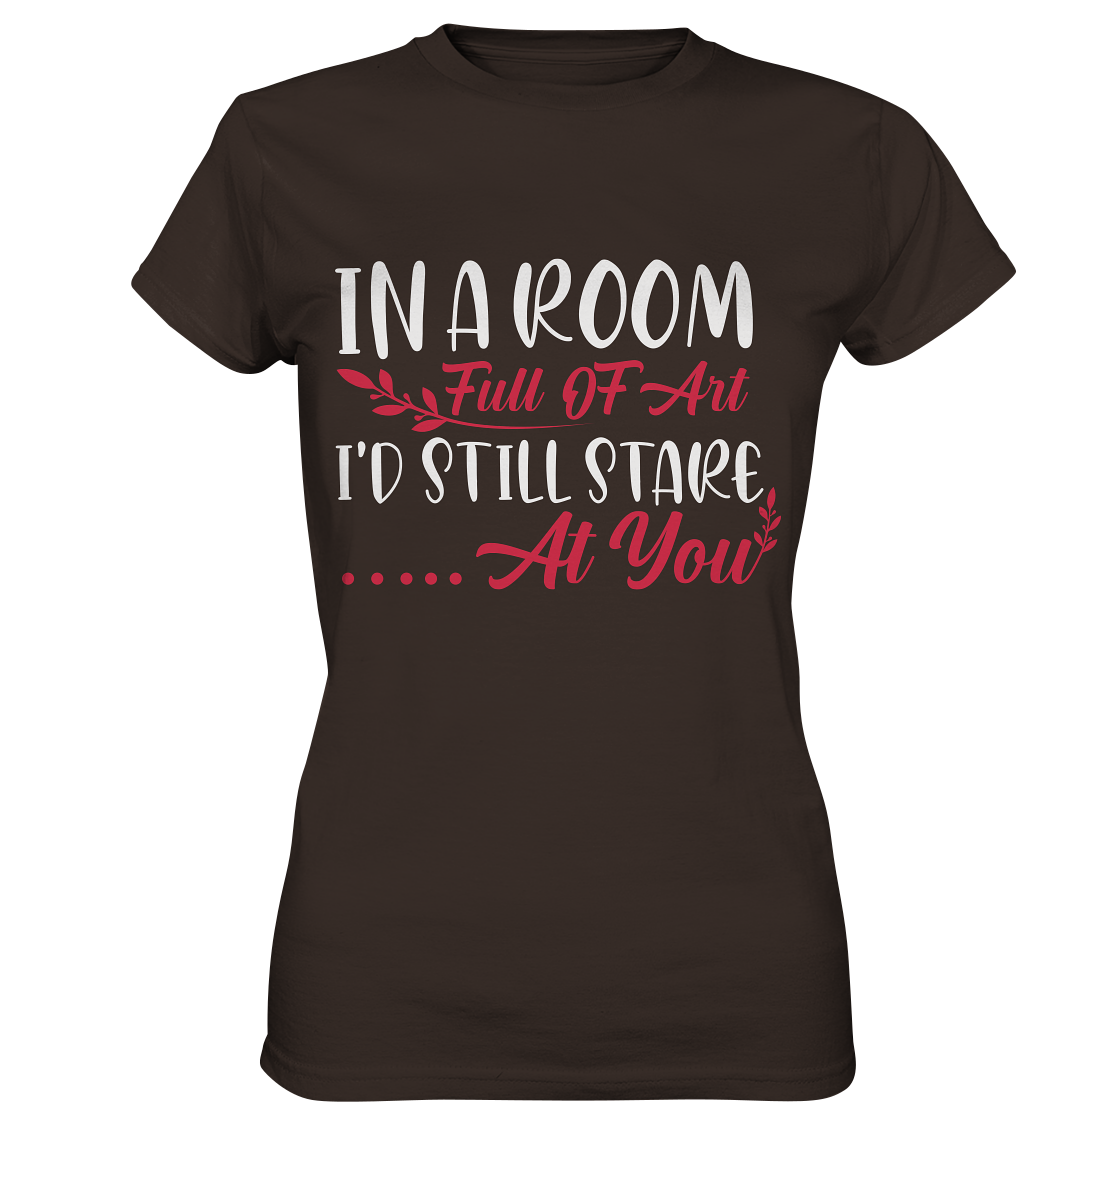 In a room full of art i'd still stare at you - Ladies Premium Shirt